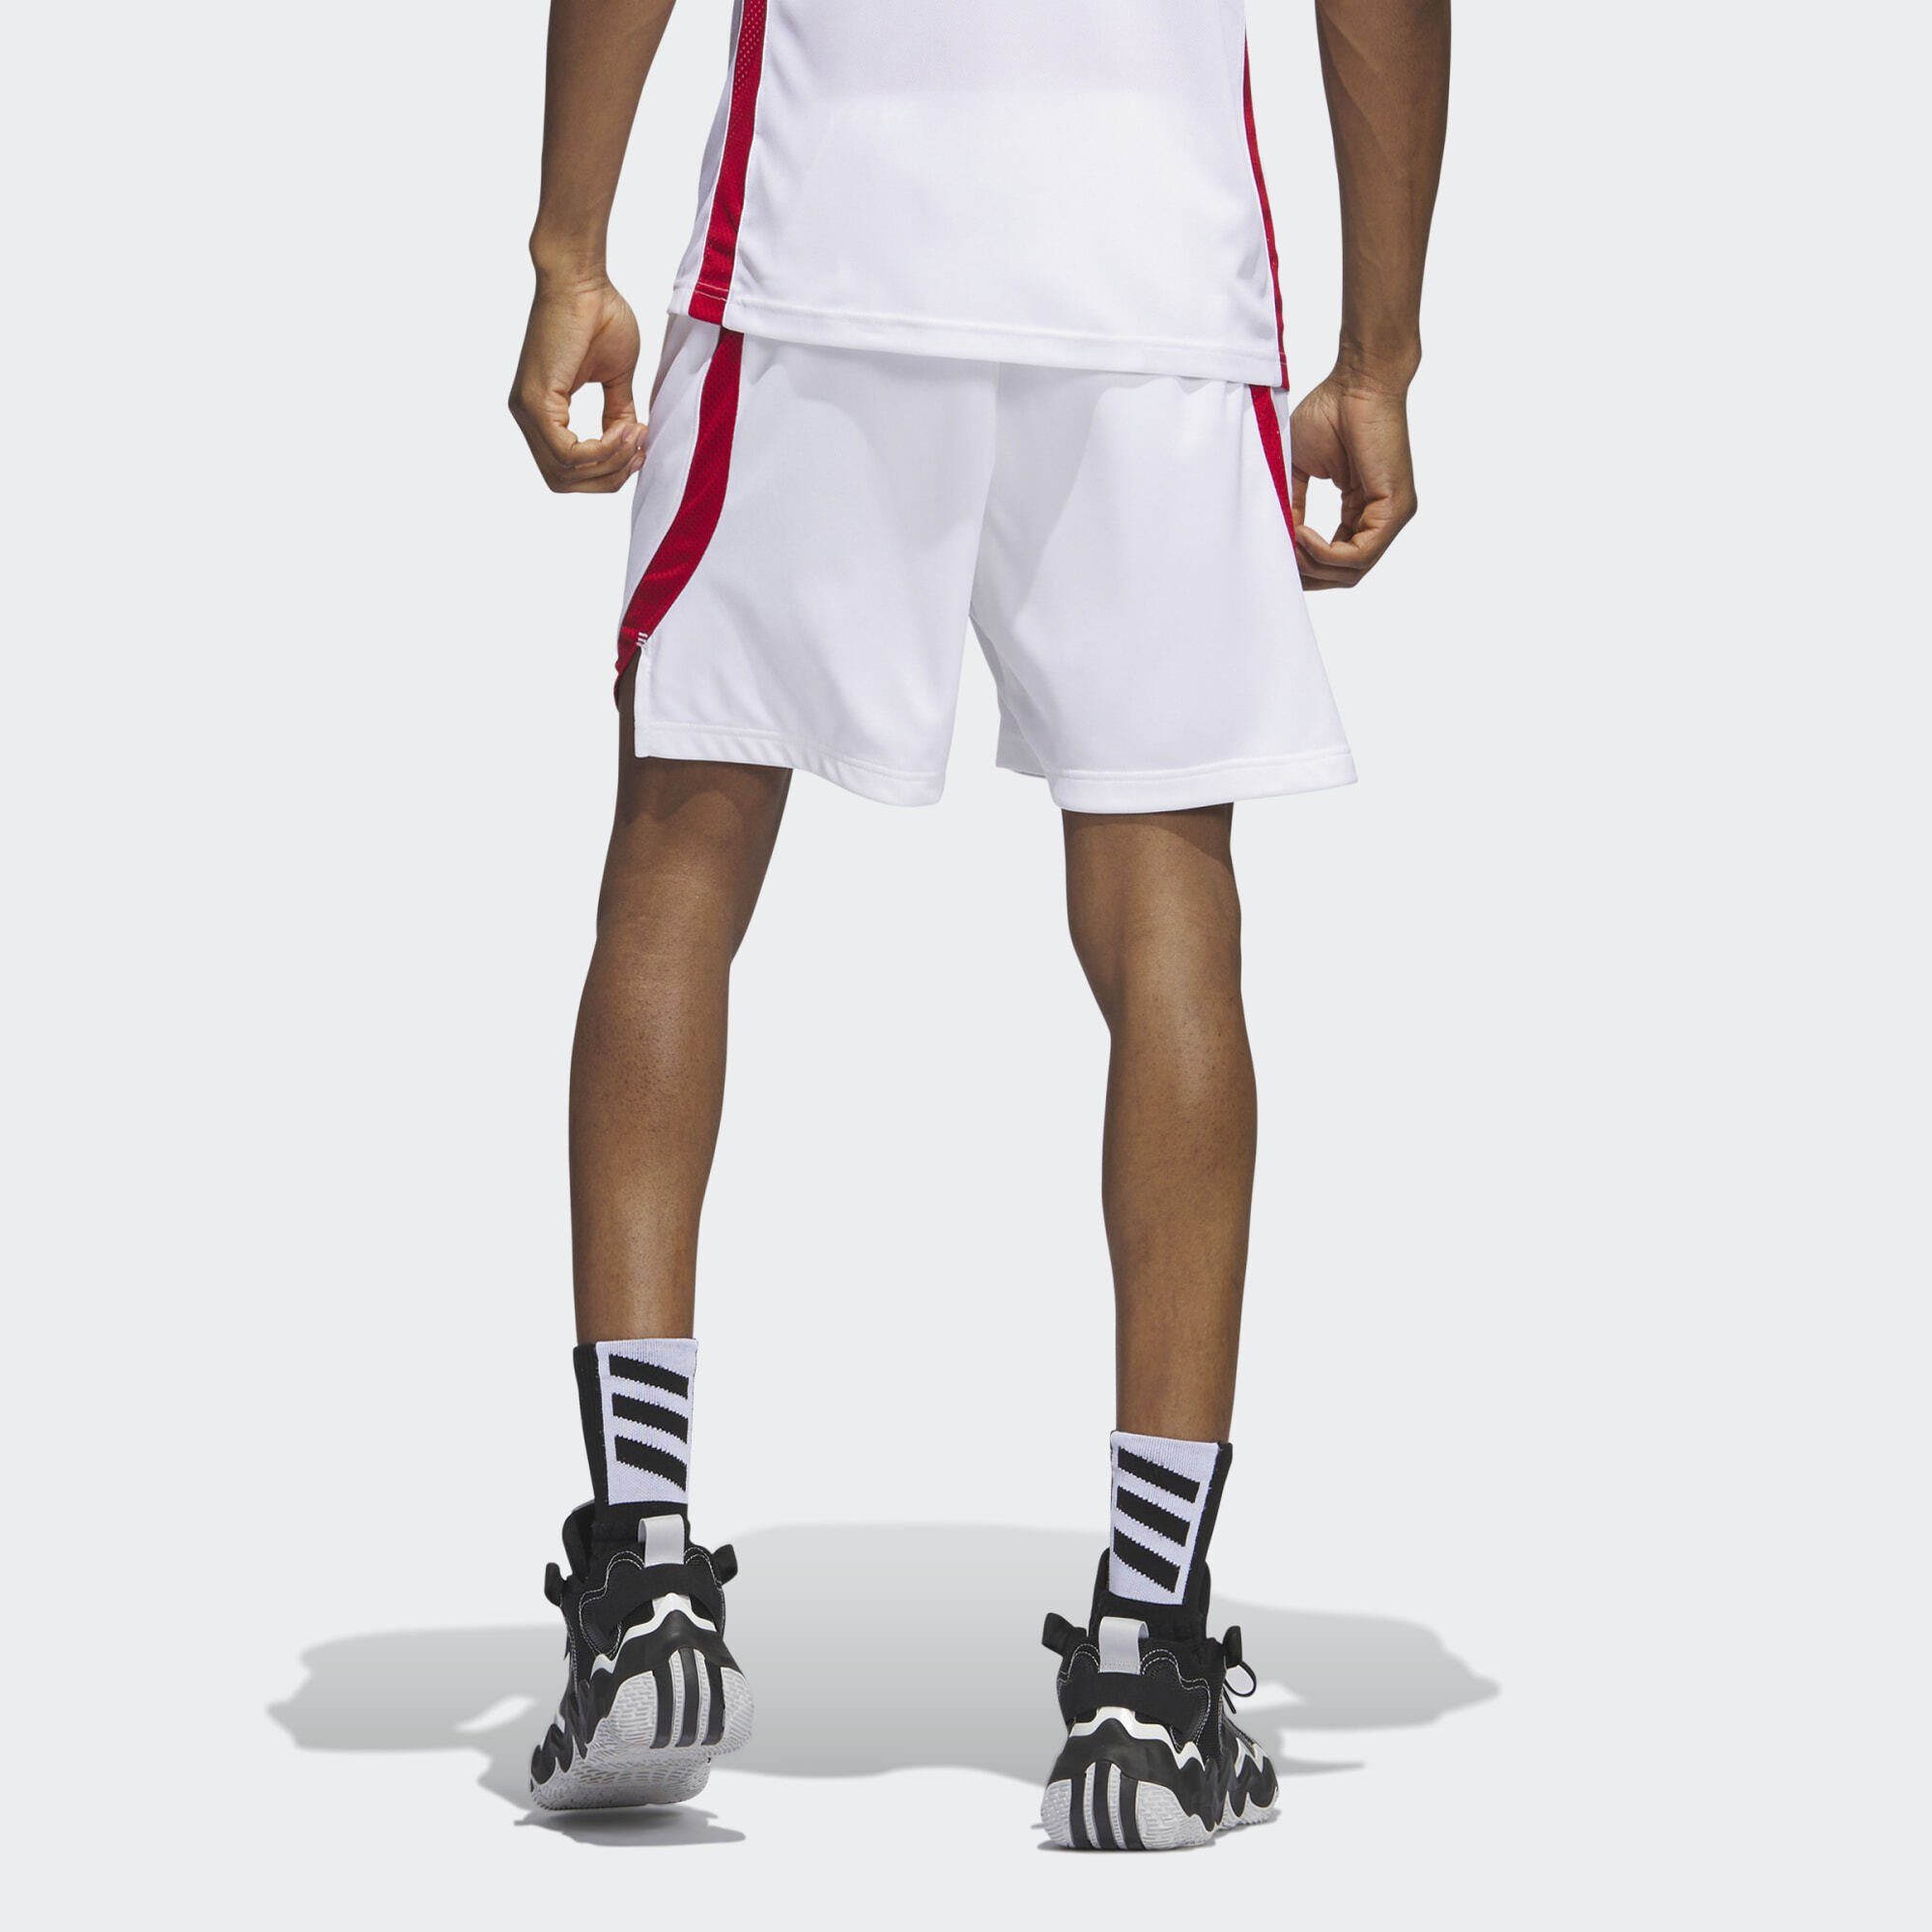 adidas Performance Funktionsshorts / ICON Power Red SHORTS White SQUAD Team